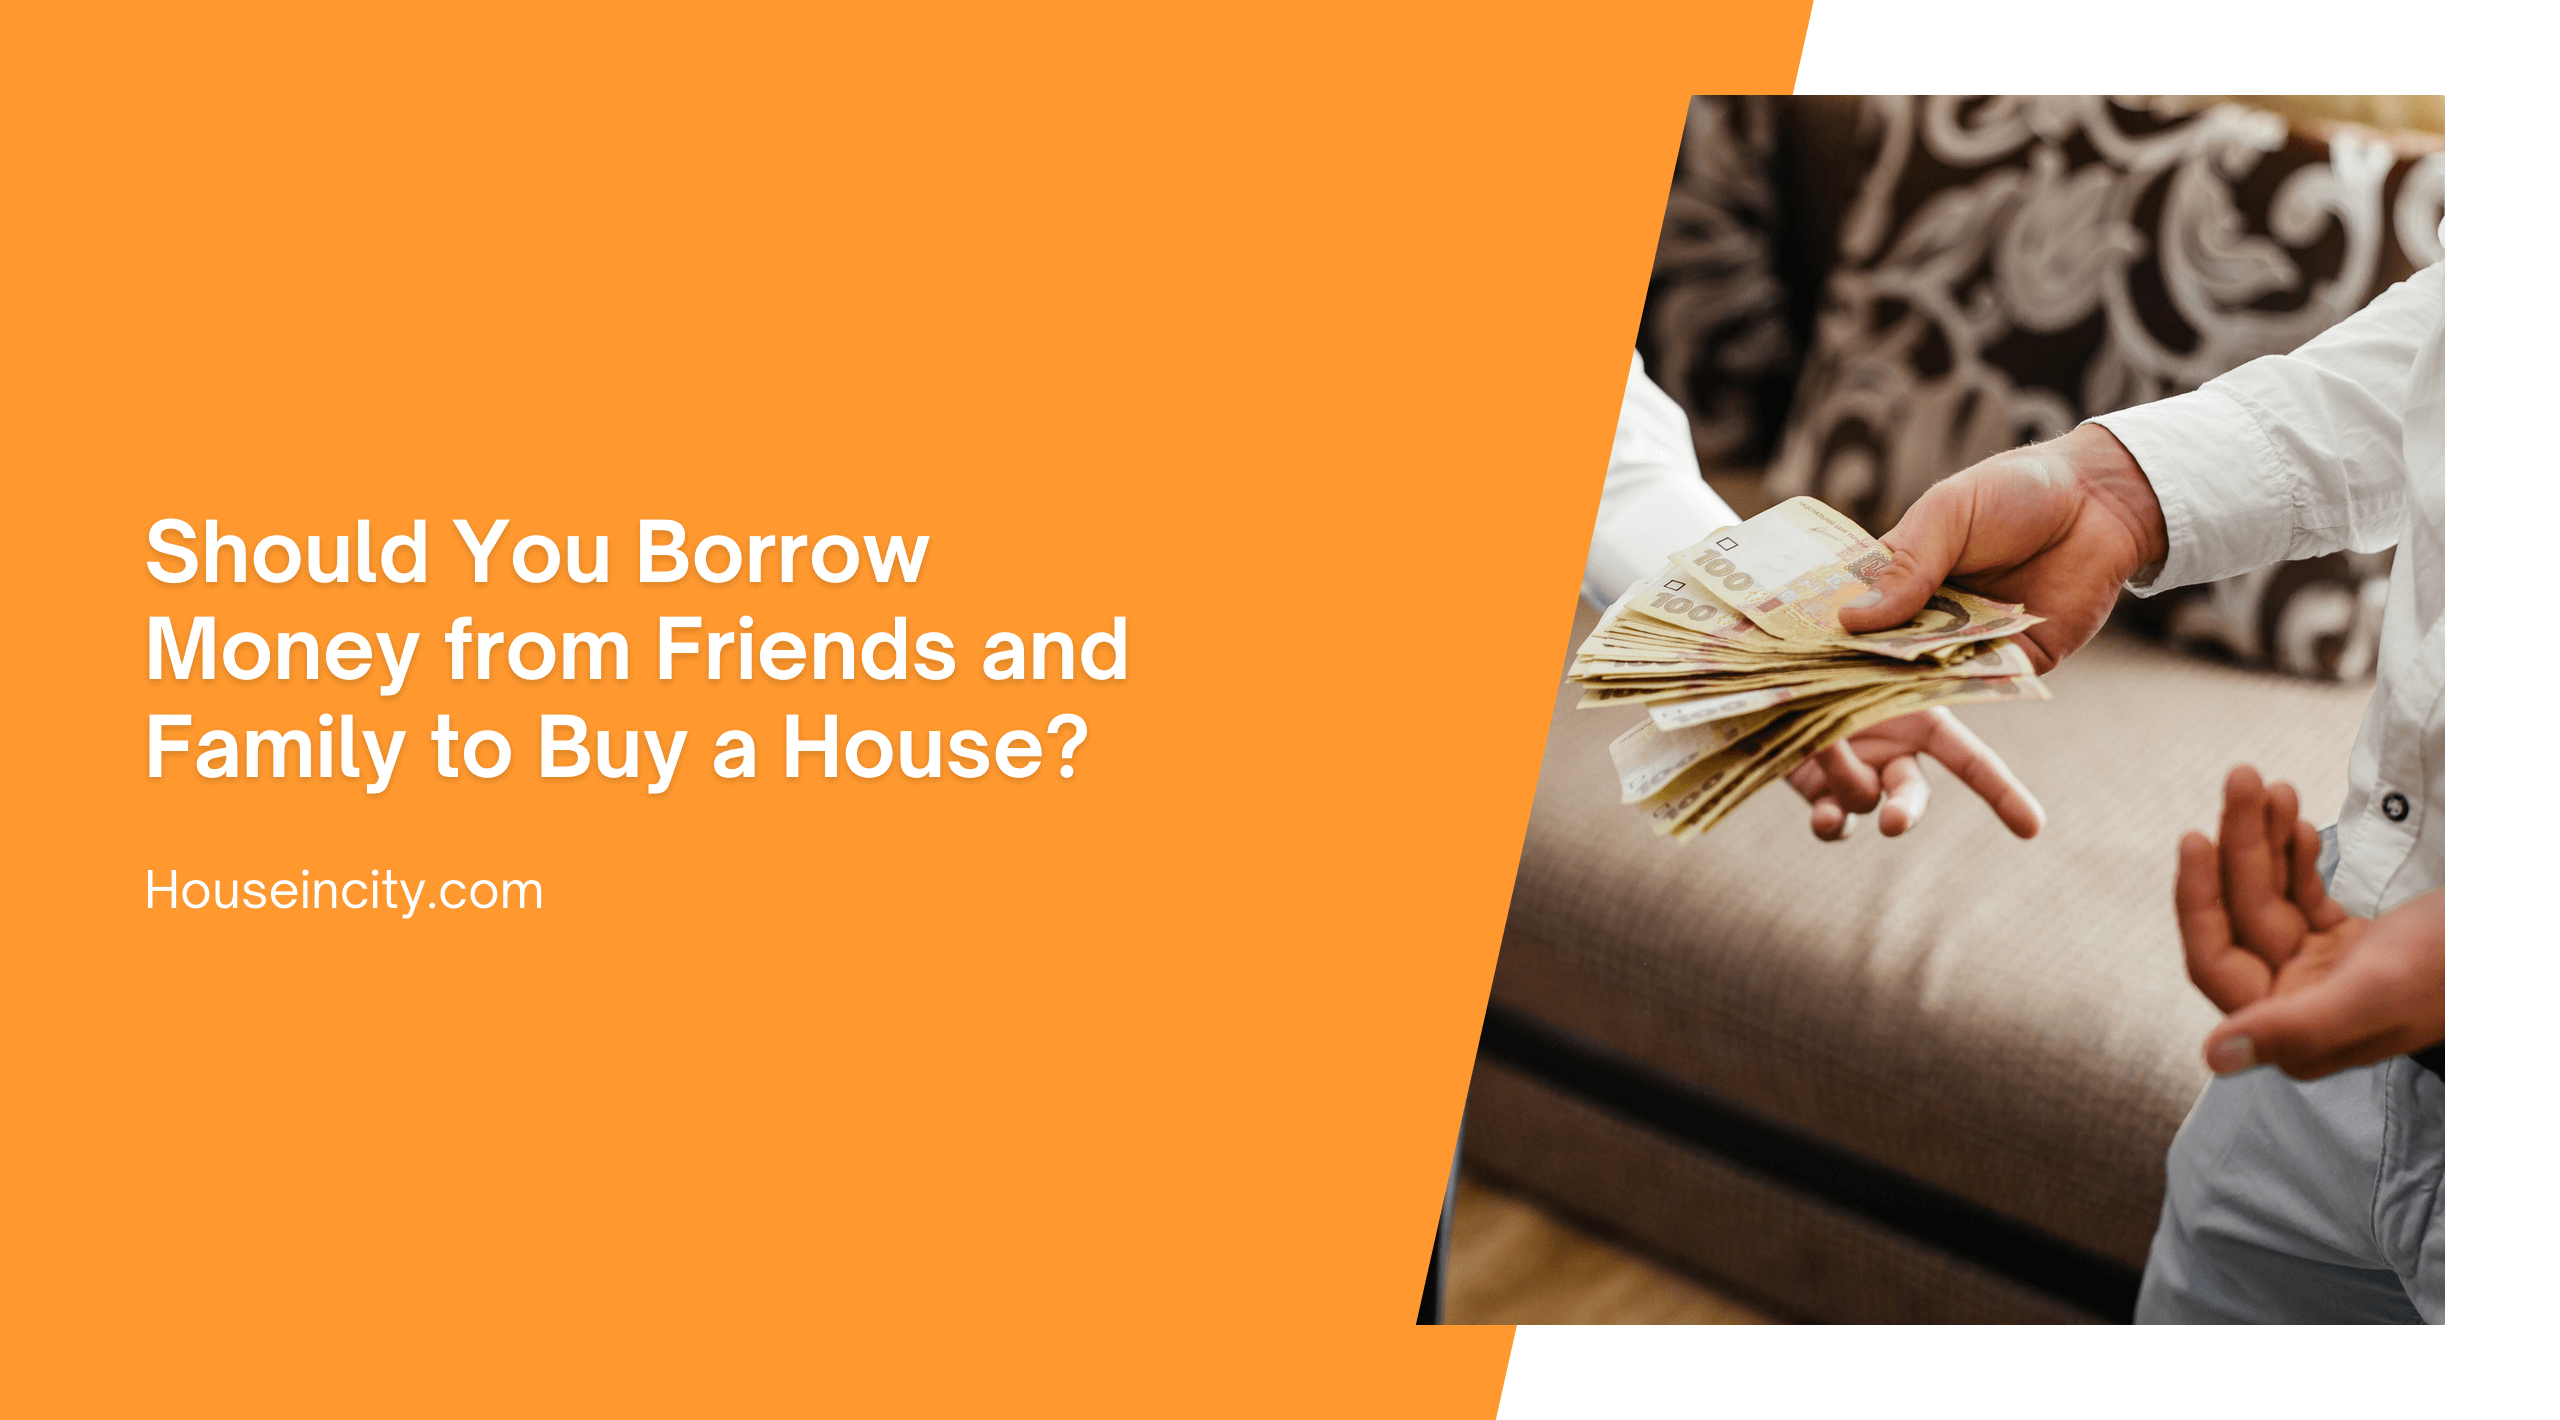 Should You Borrow Money from Friends and Family to Buy a House?